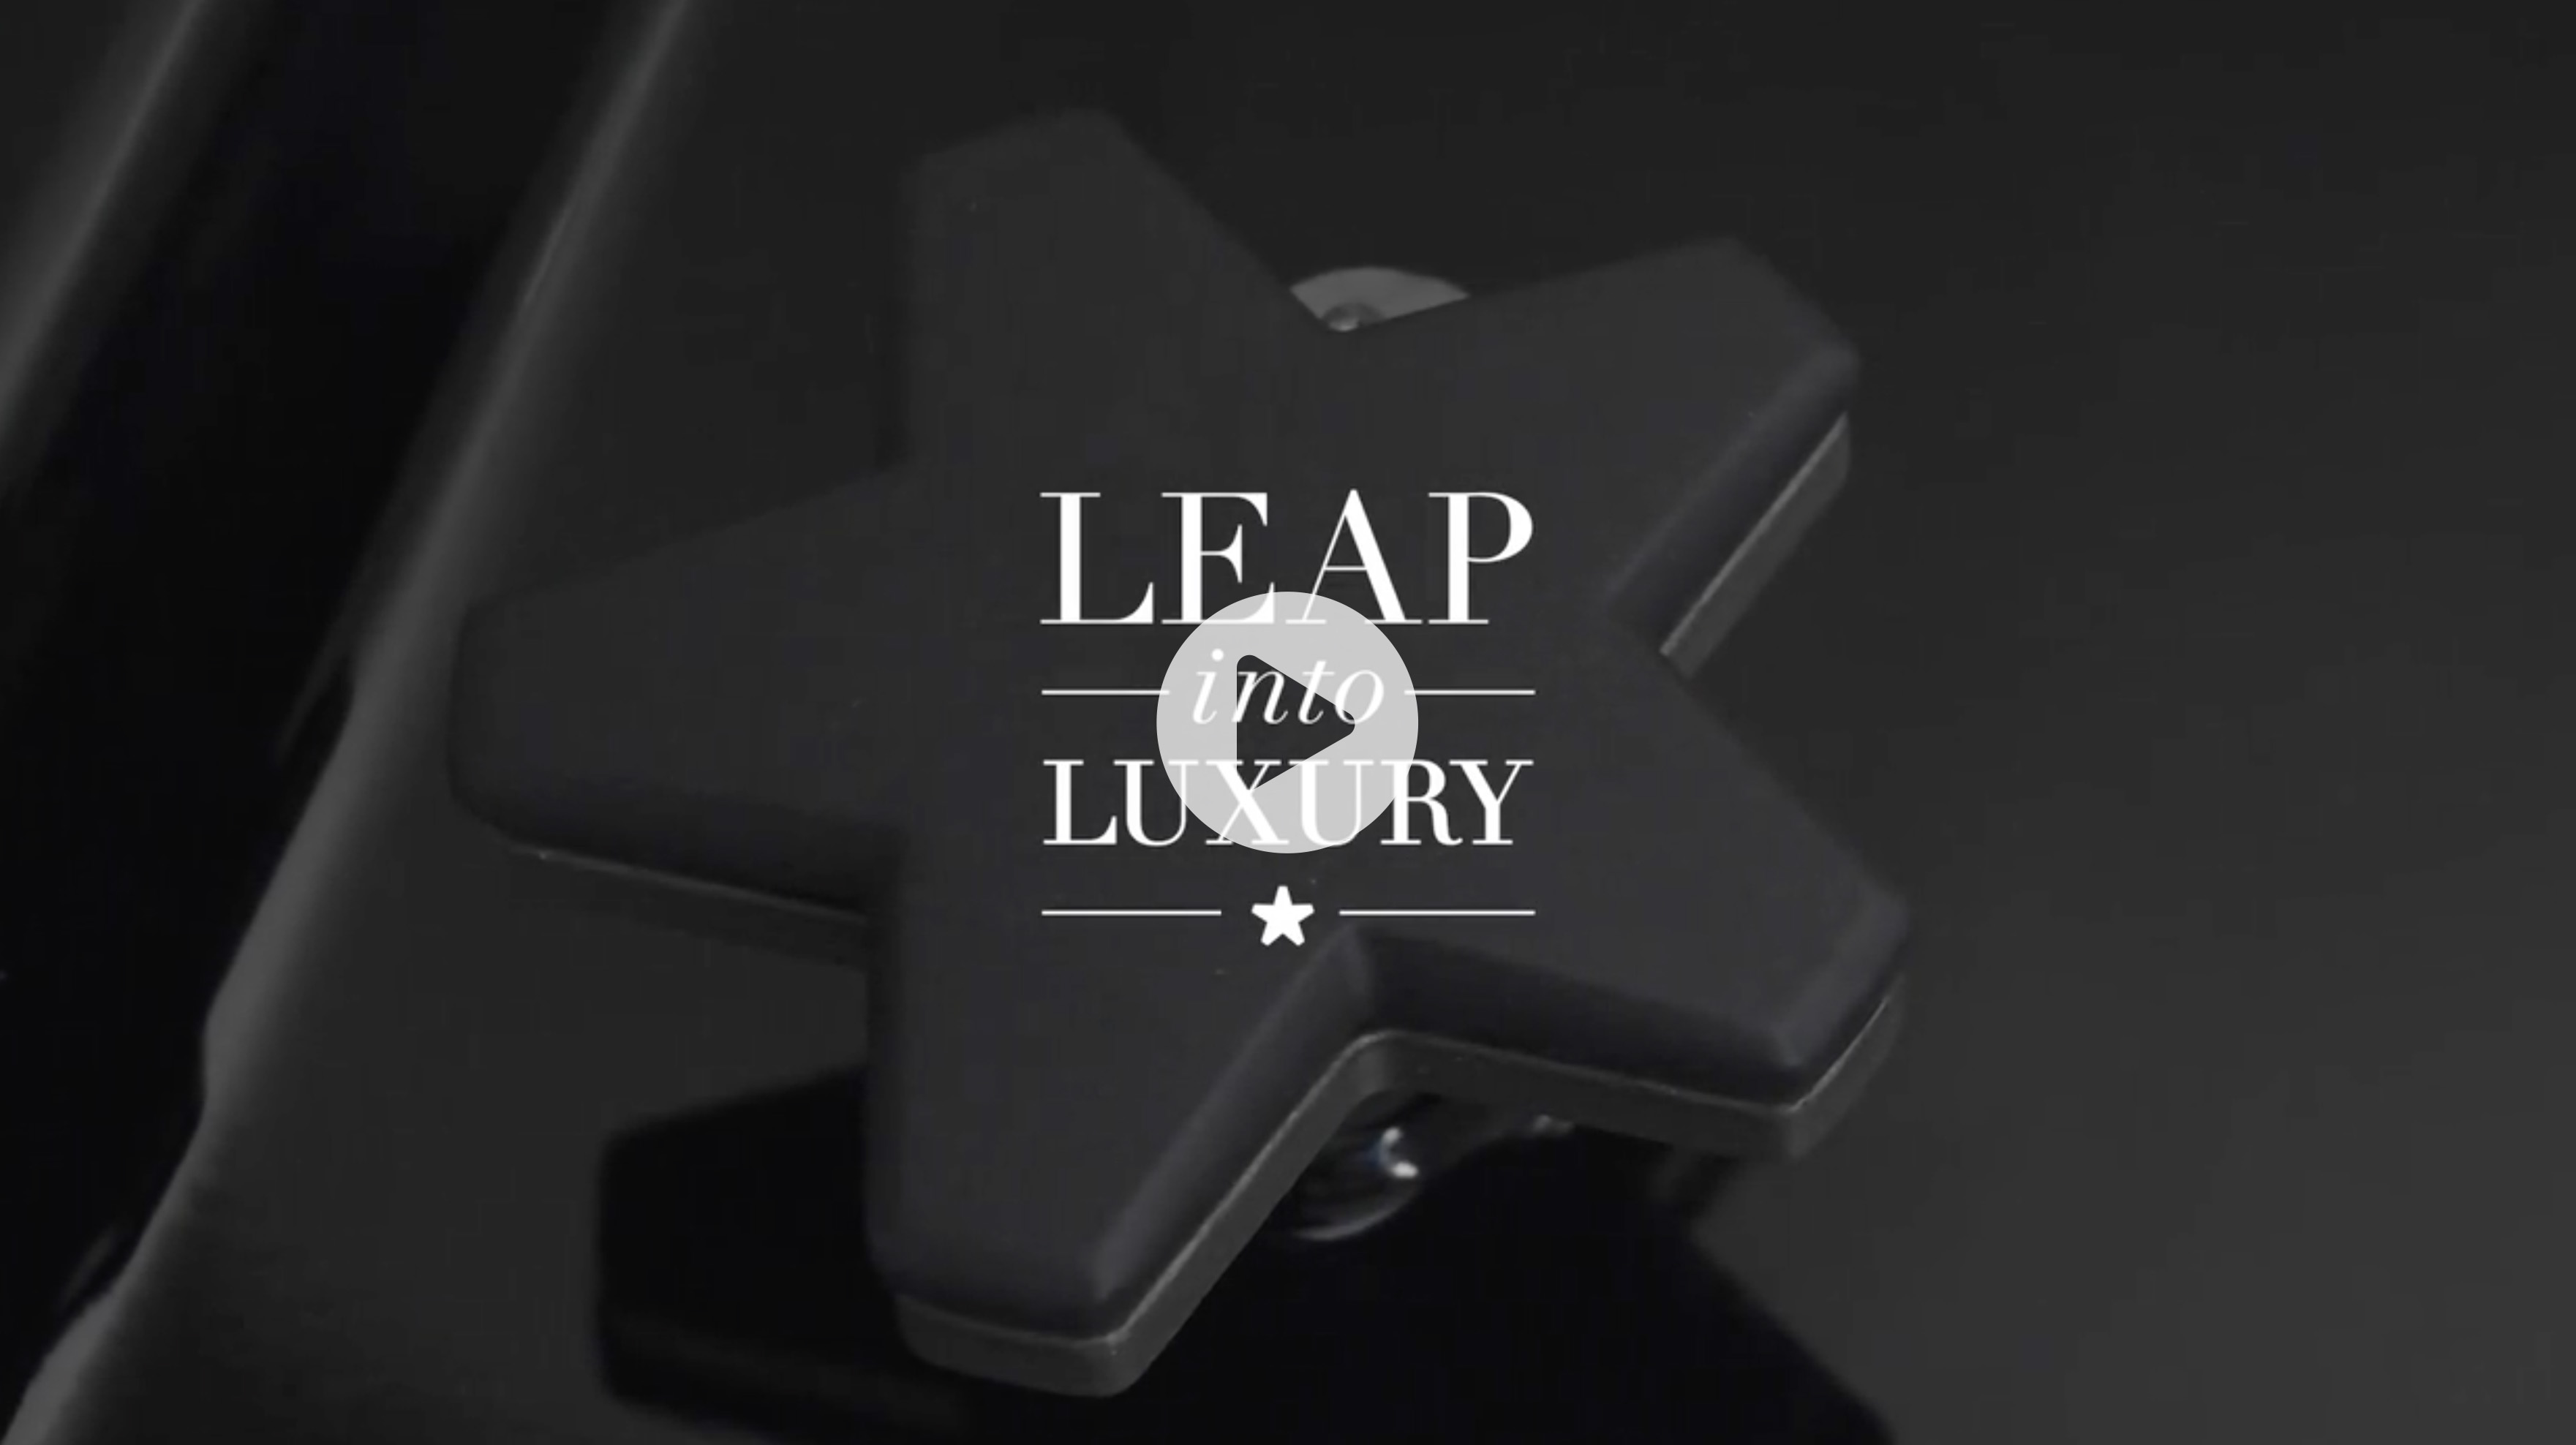 Thermador Leap Into Luxury